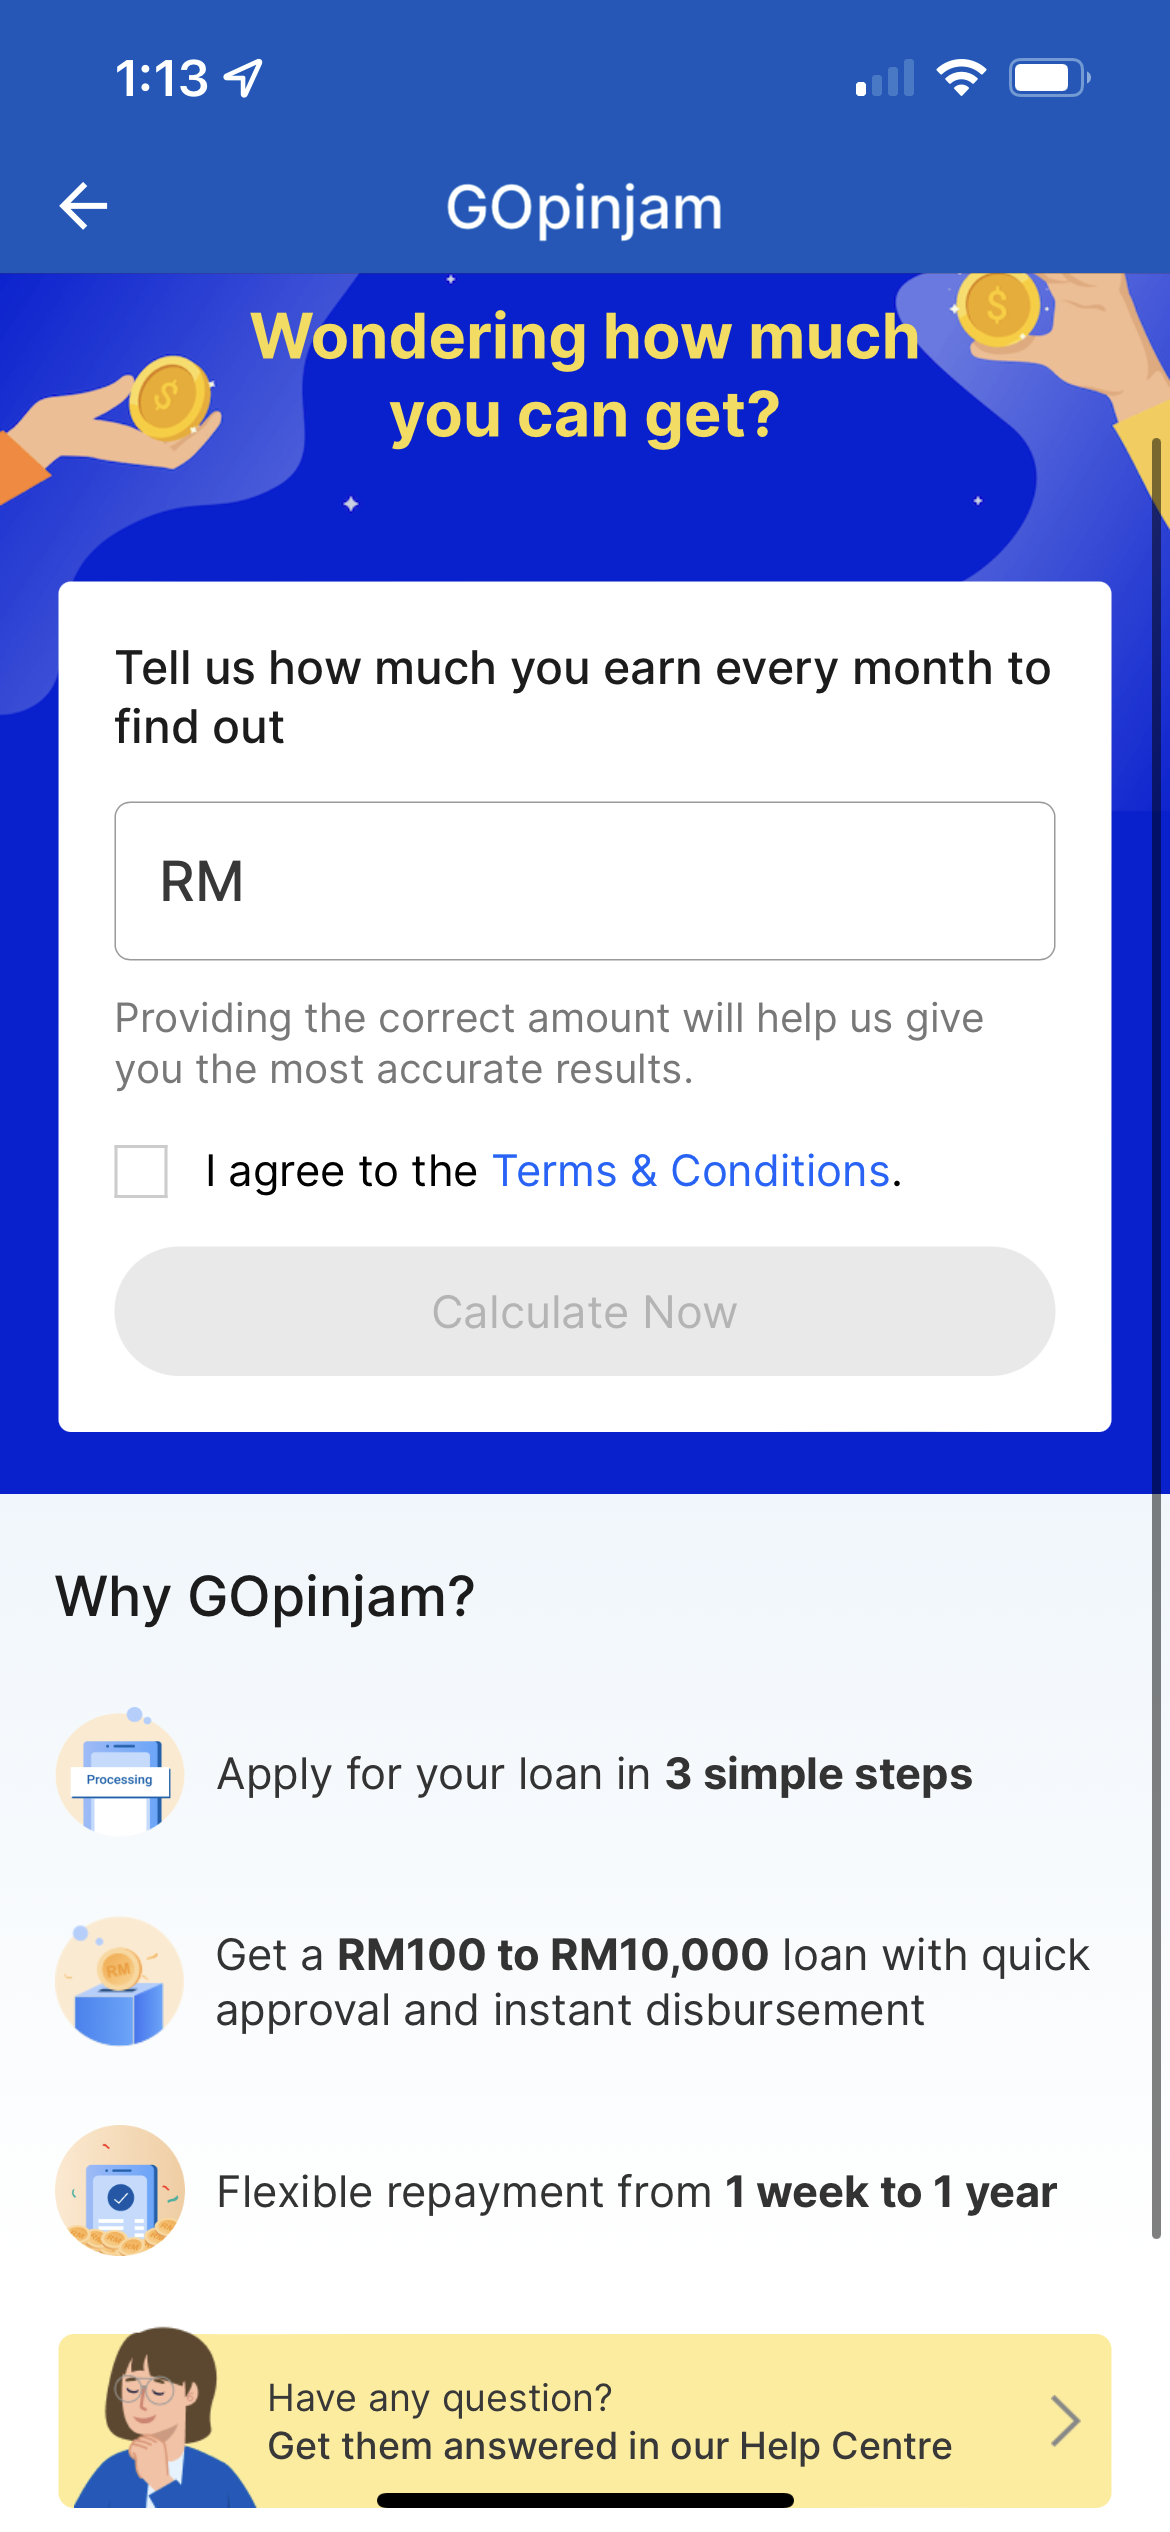 touch-n-go-offers-personal-loans-up-to-rm10000-2